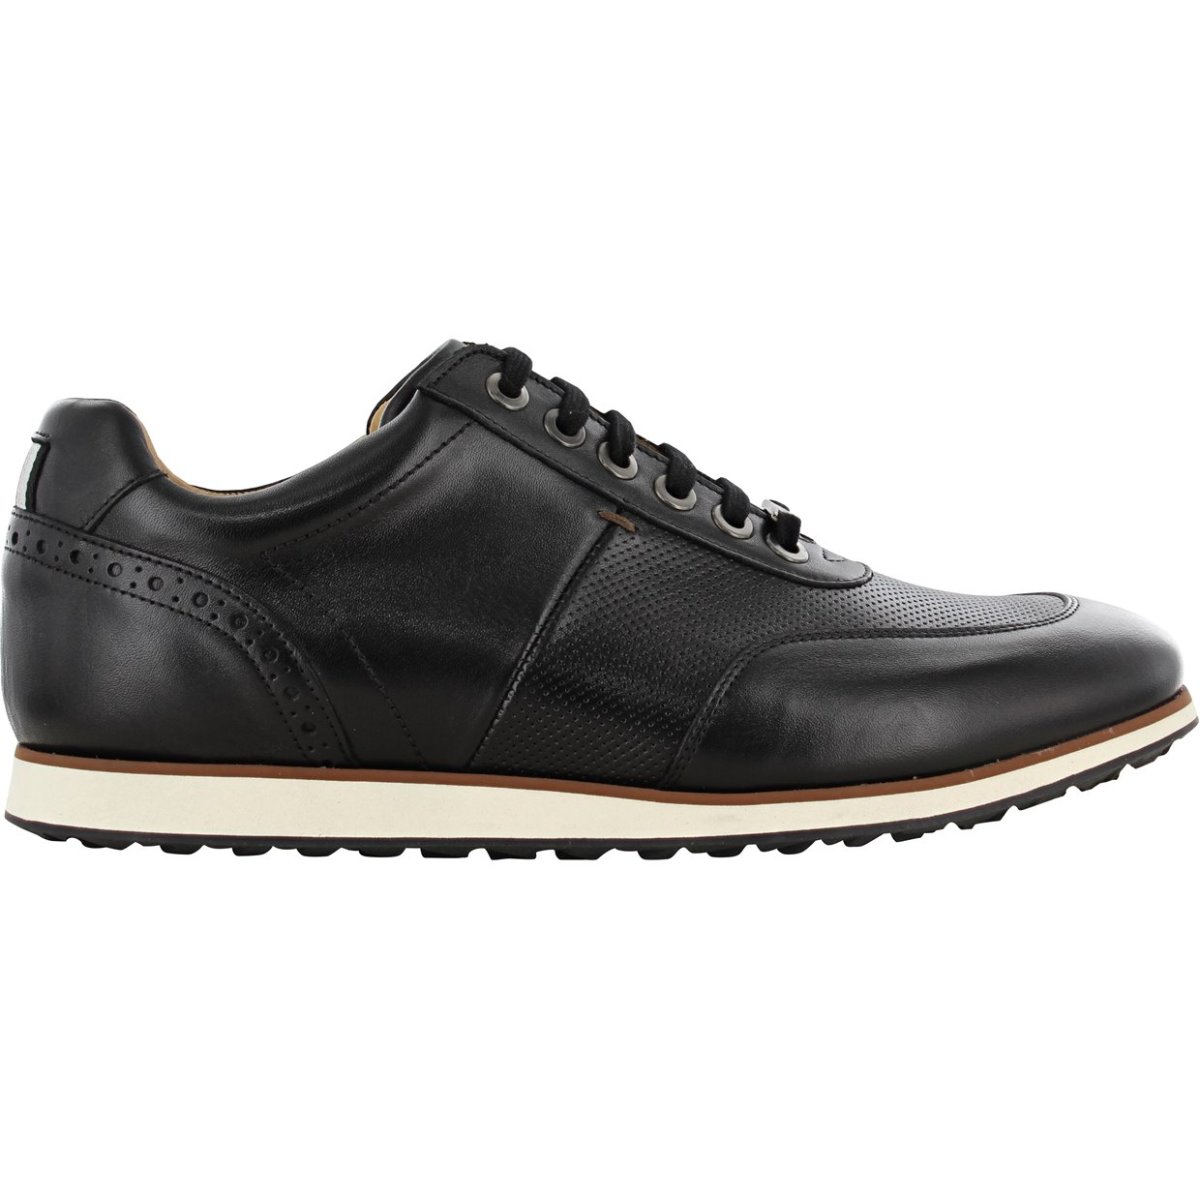 Royal Albartross Spikeless Golf Shoes -'The Driver'